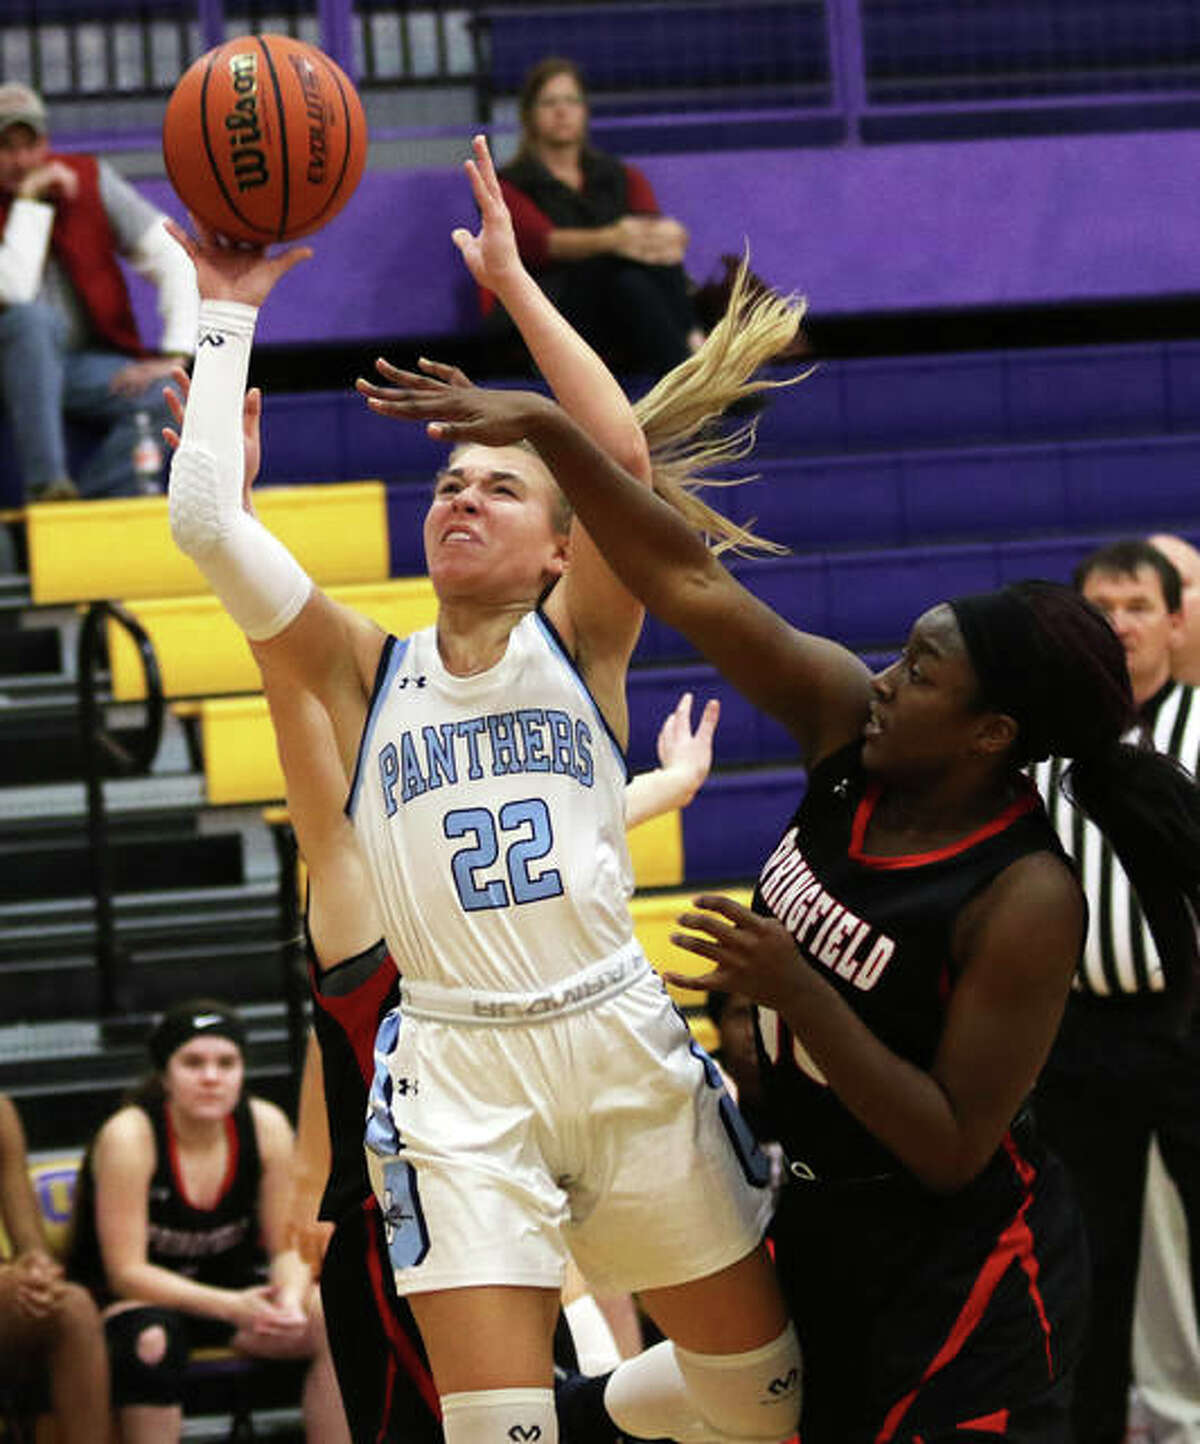 Jersey’s Clare Breden (22) splits defenders to put up a shot contested by Springfield’s Virtuous Komolafe on Saturday night at the CM/Adidas Shootout in Bethalto.